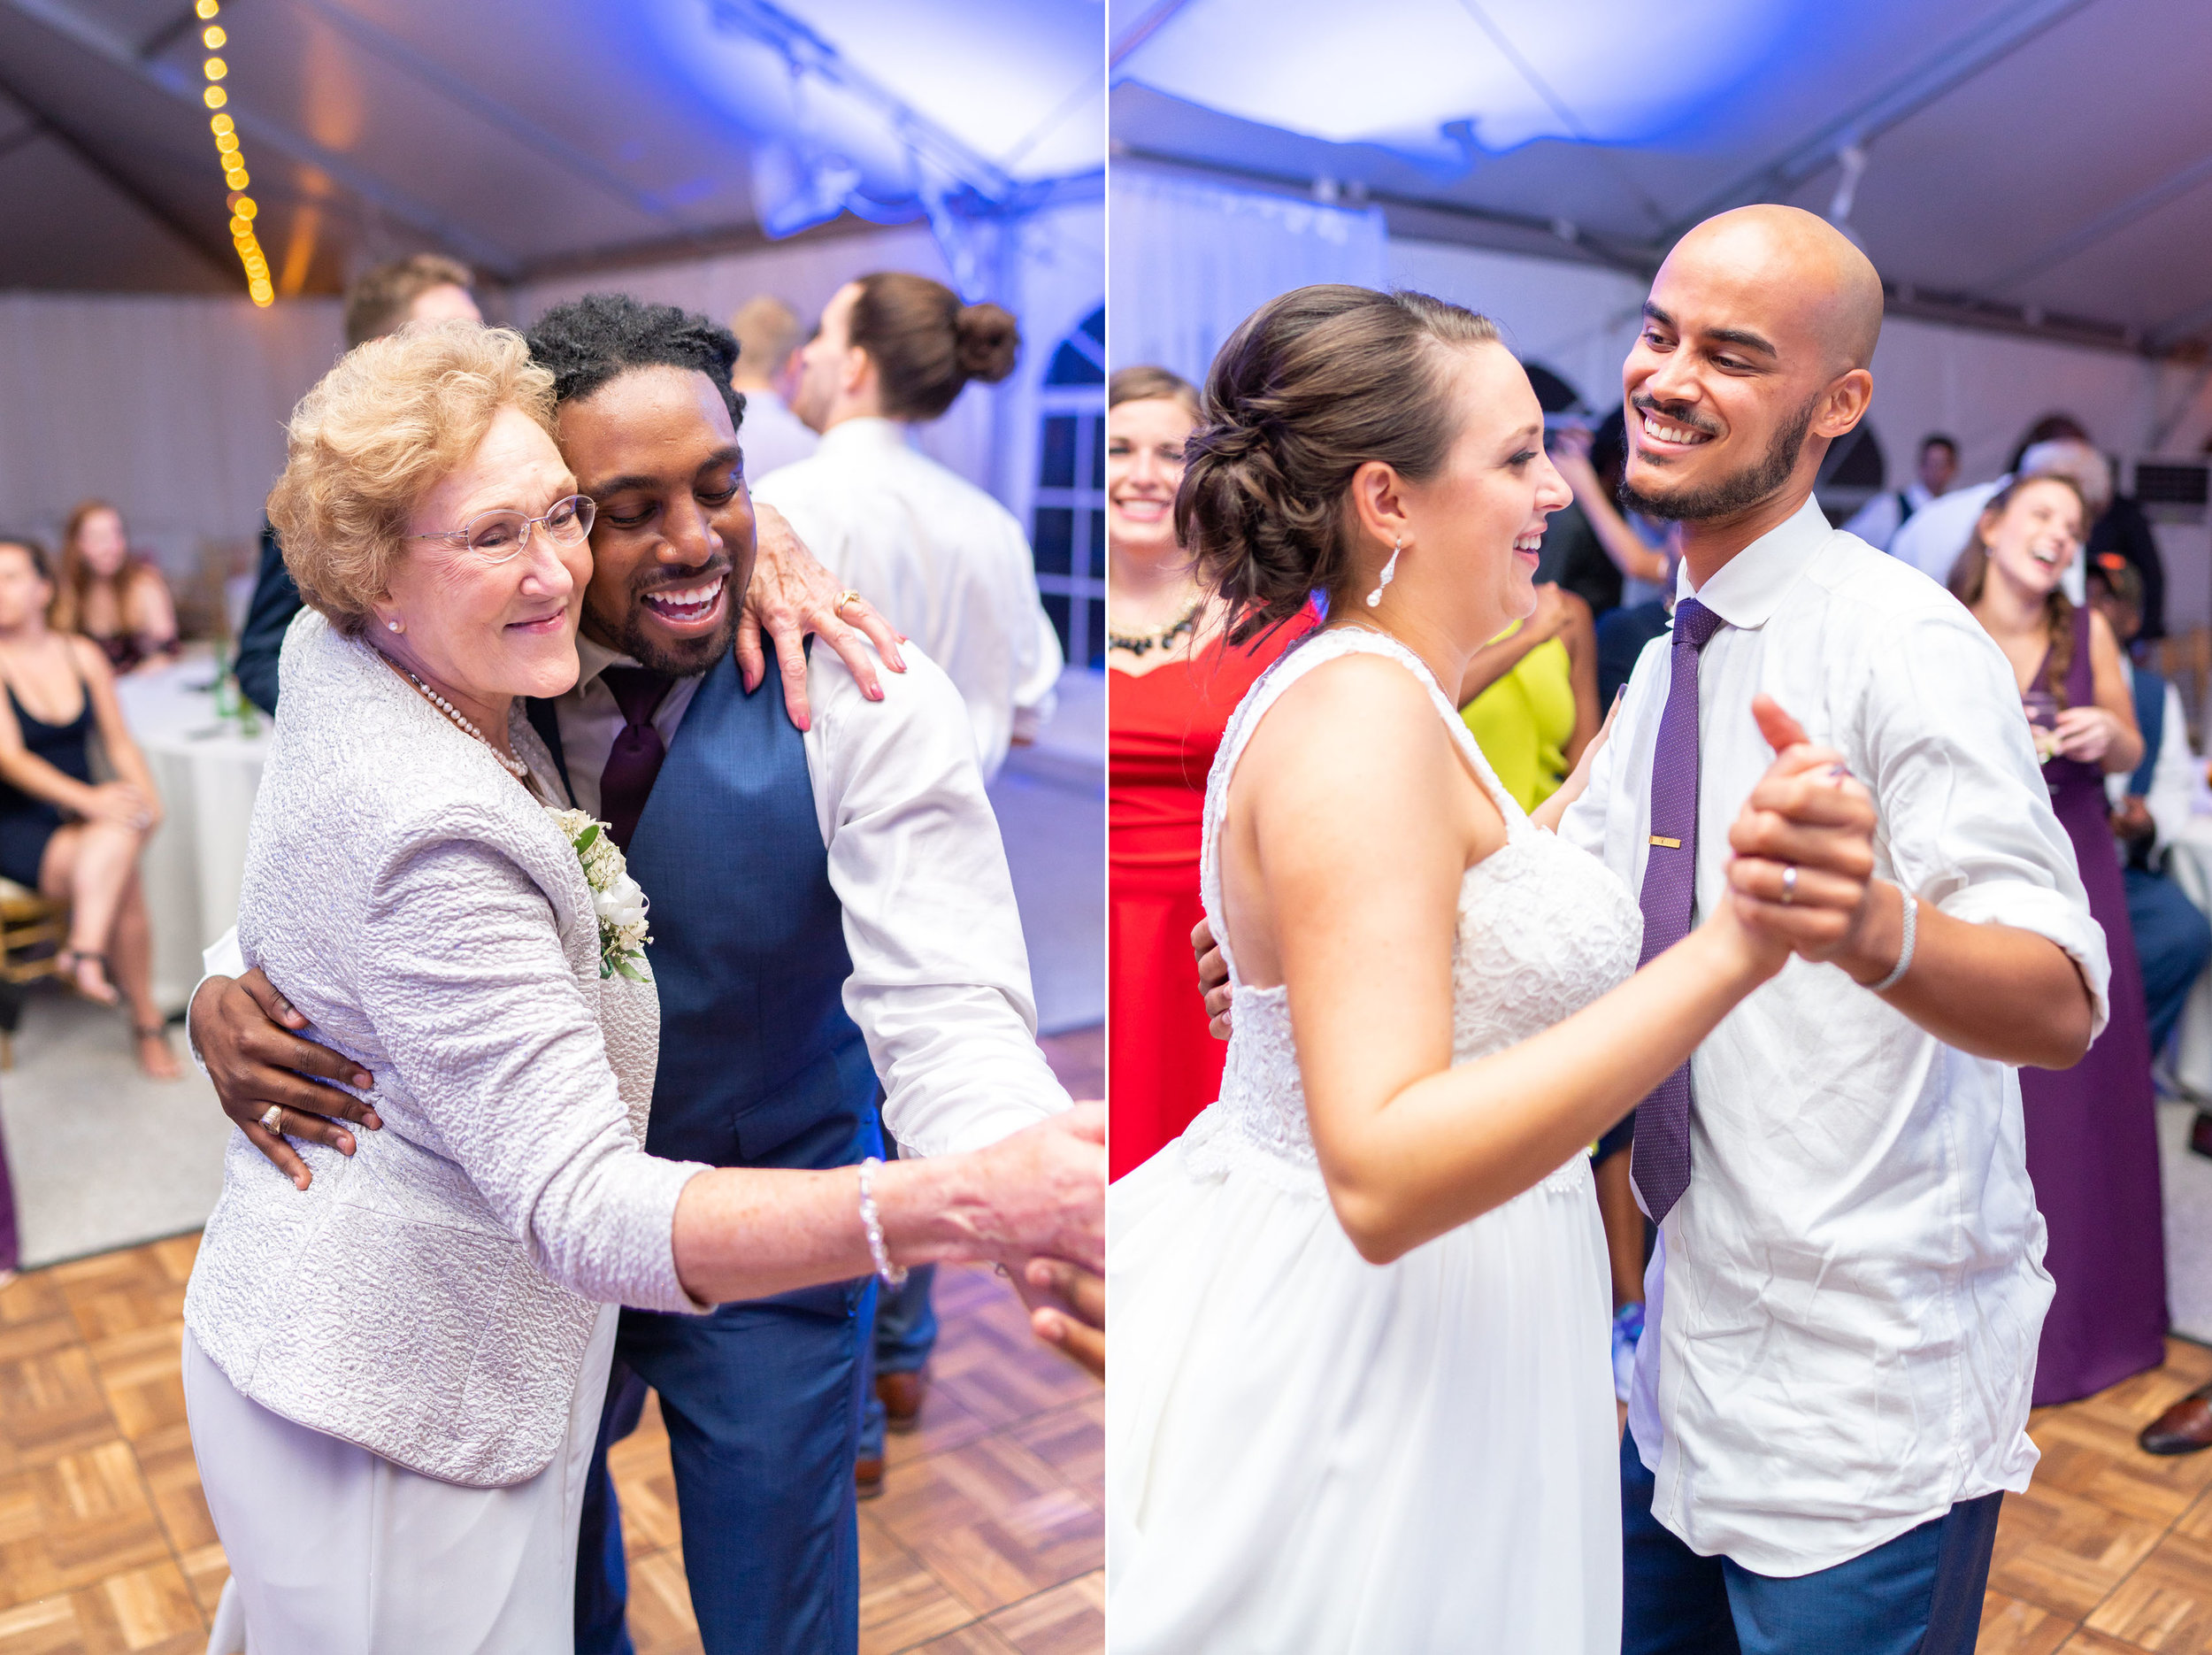 Guests dancing (left) and bride and groom dancing (right) at white tent wedding reception in Leesburg